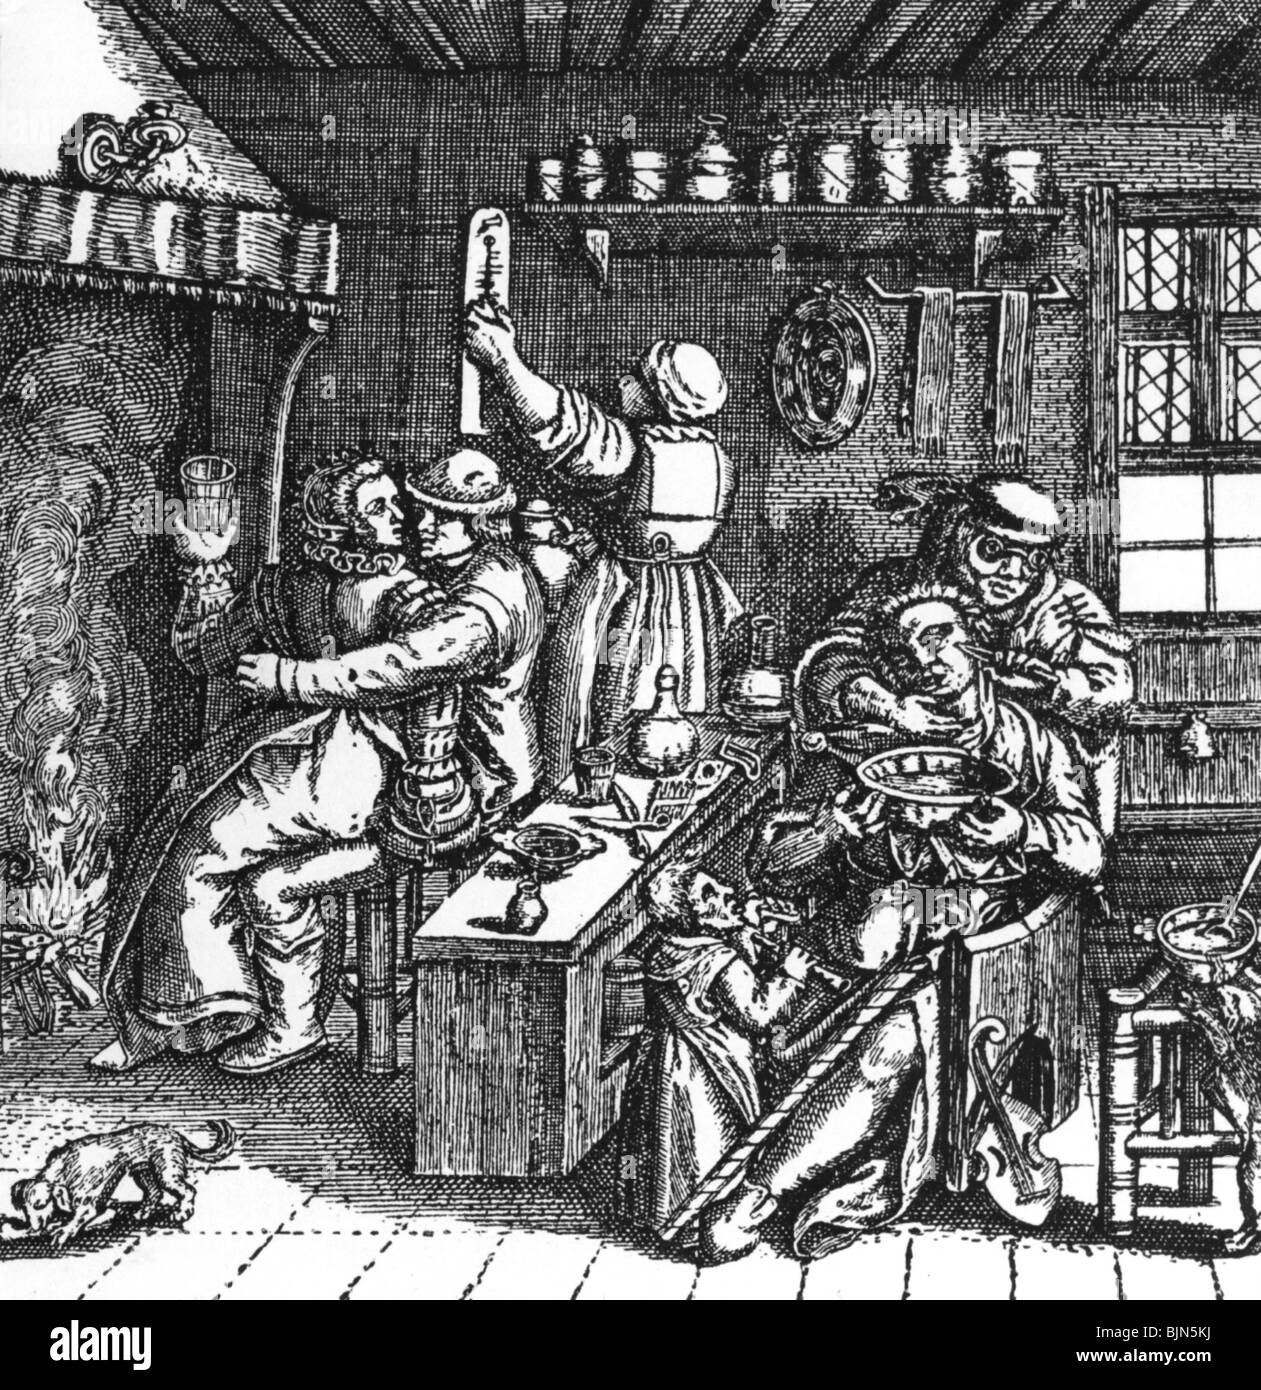 people, professions, barber, interior of a barber's shop, copper engraving by Th. de Bry, circa 1600, Stock Photo